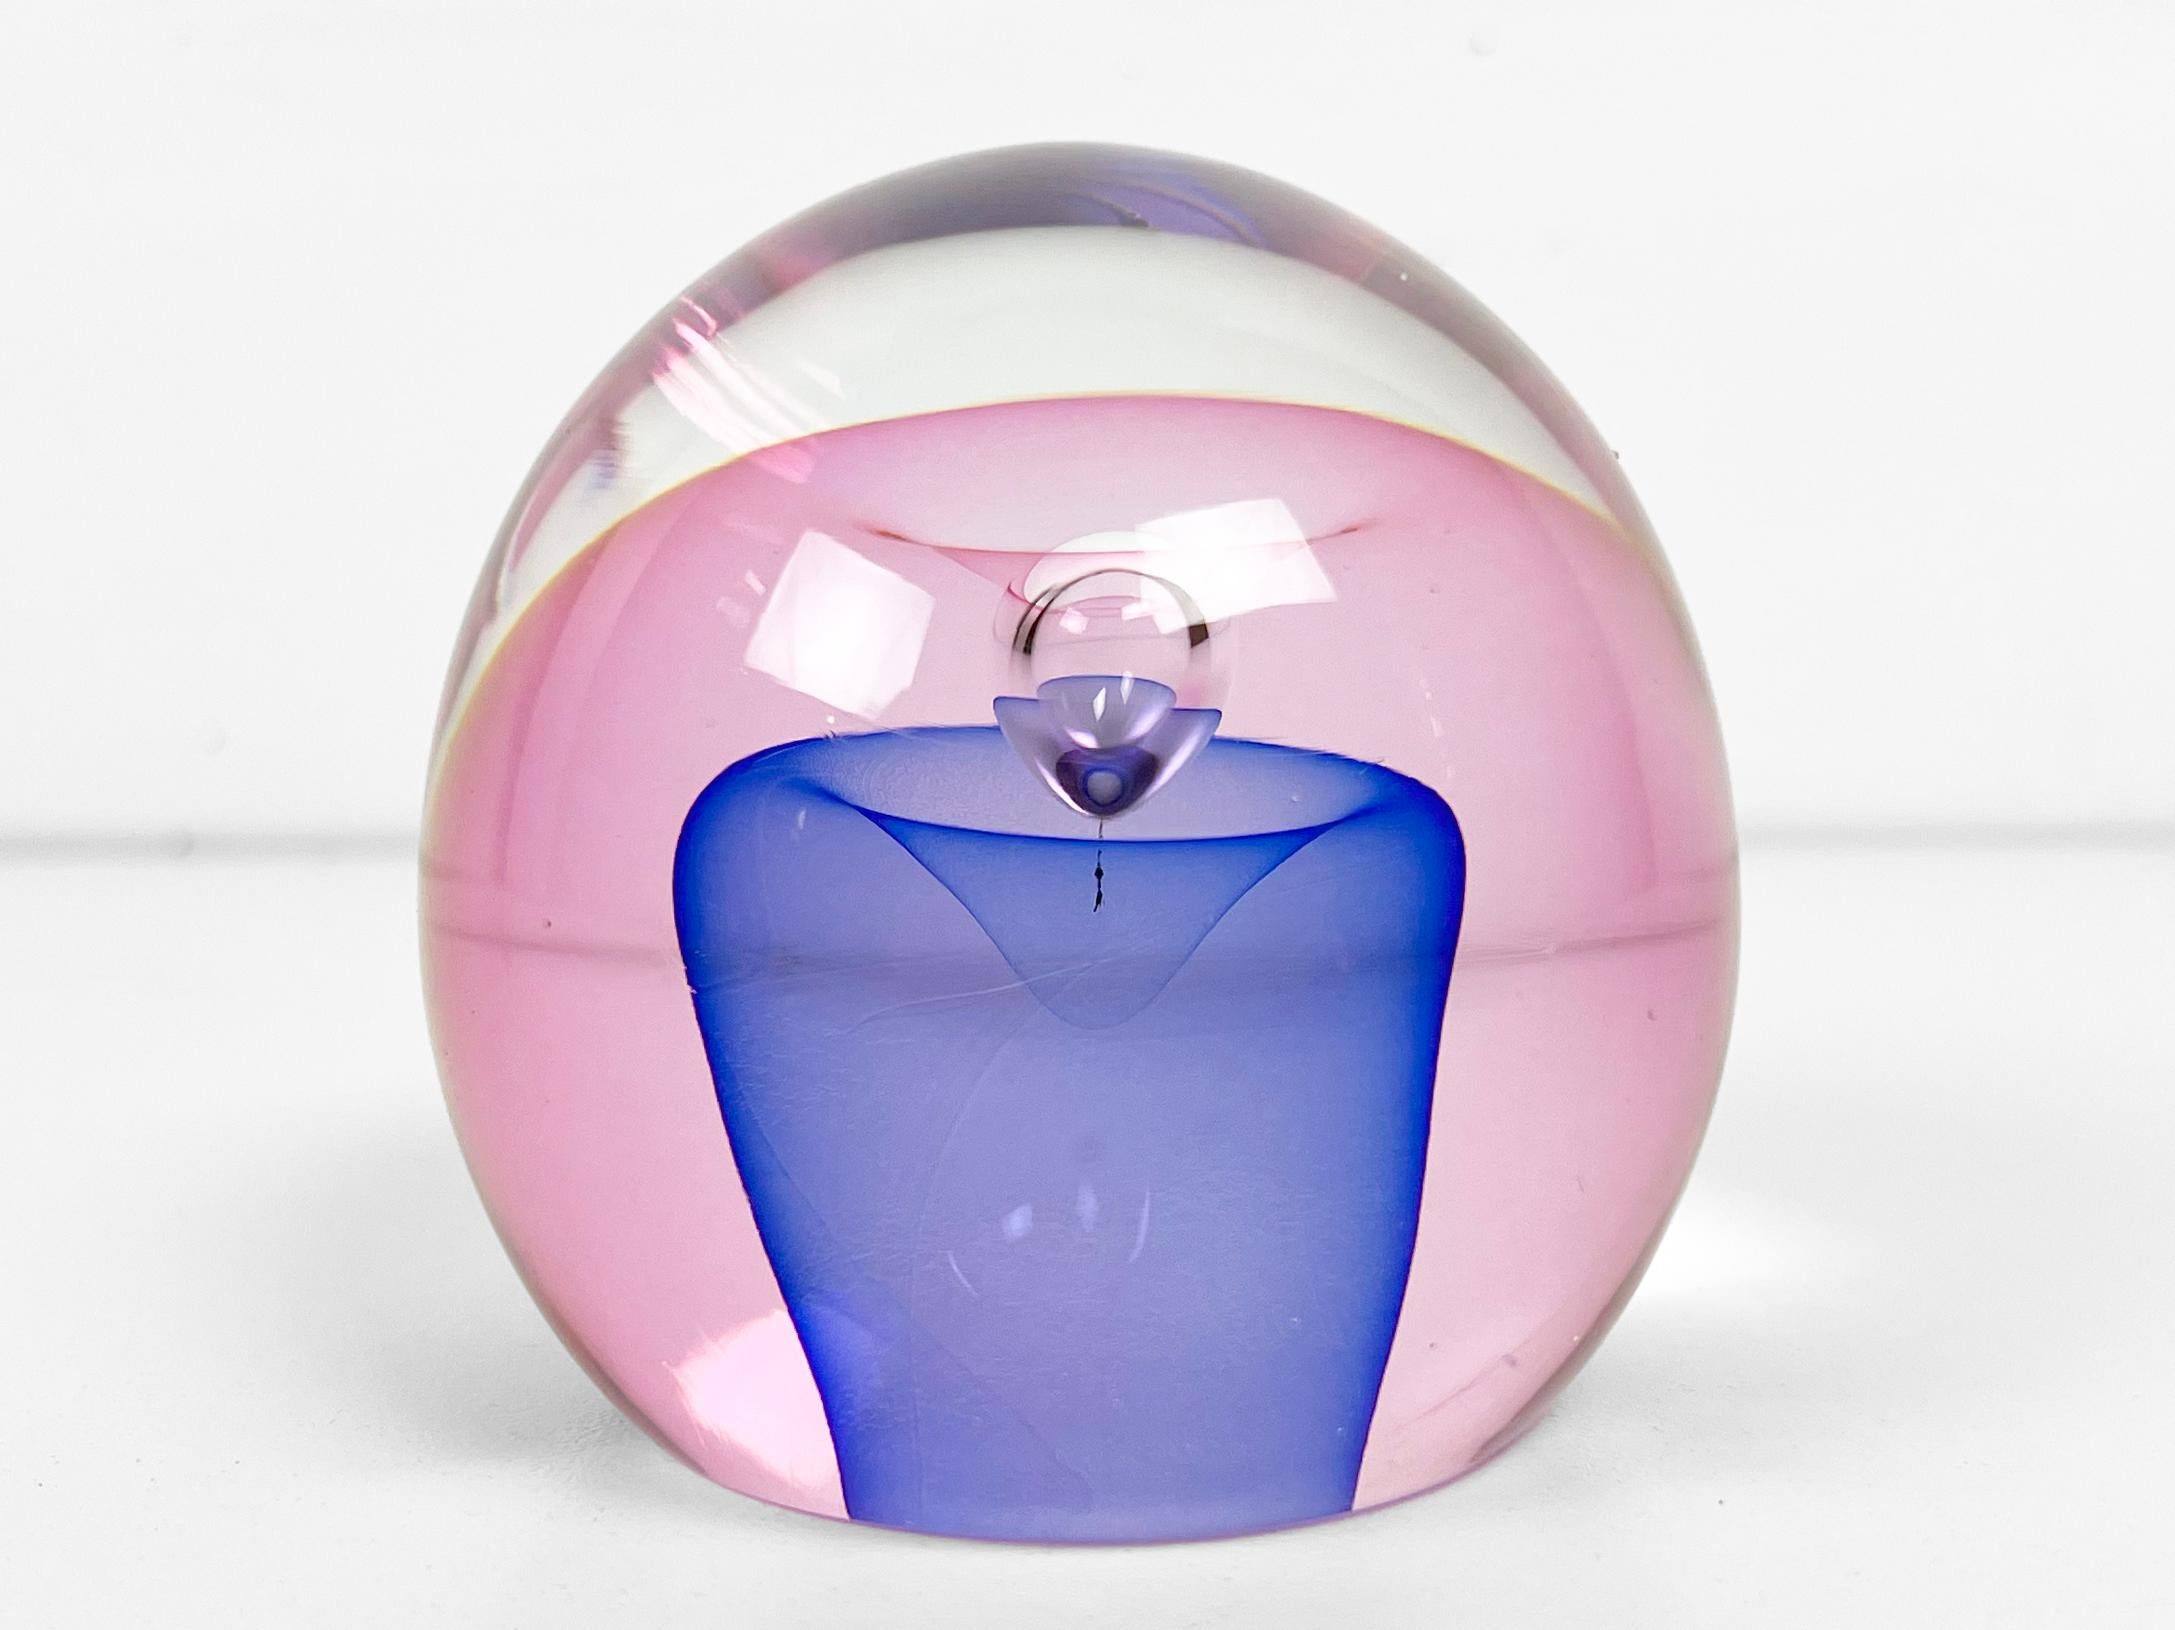 Orb shaped paperweight by glass artist Edward Kachurik in pink and blue. Signed 